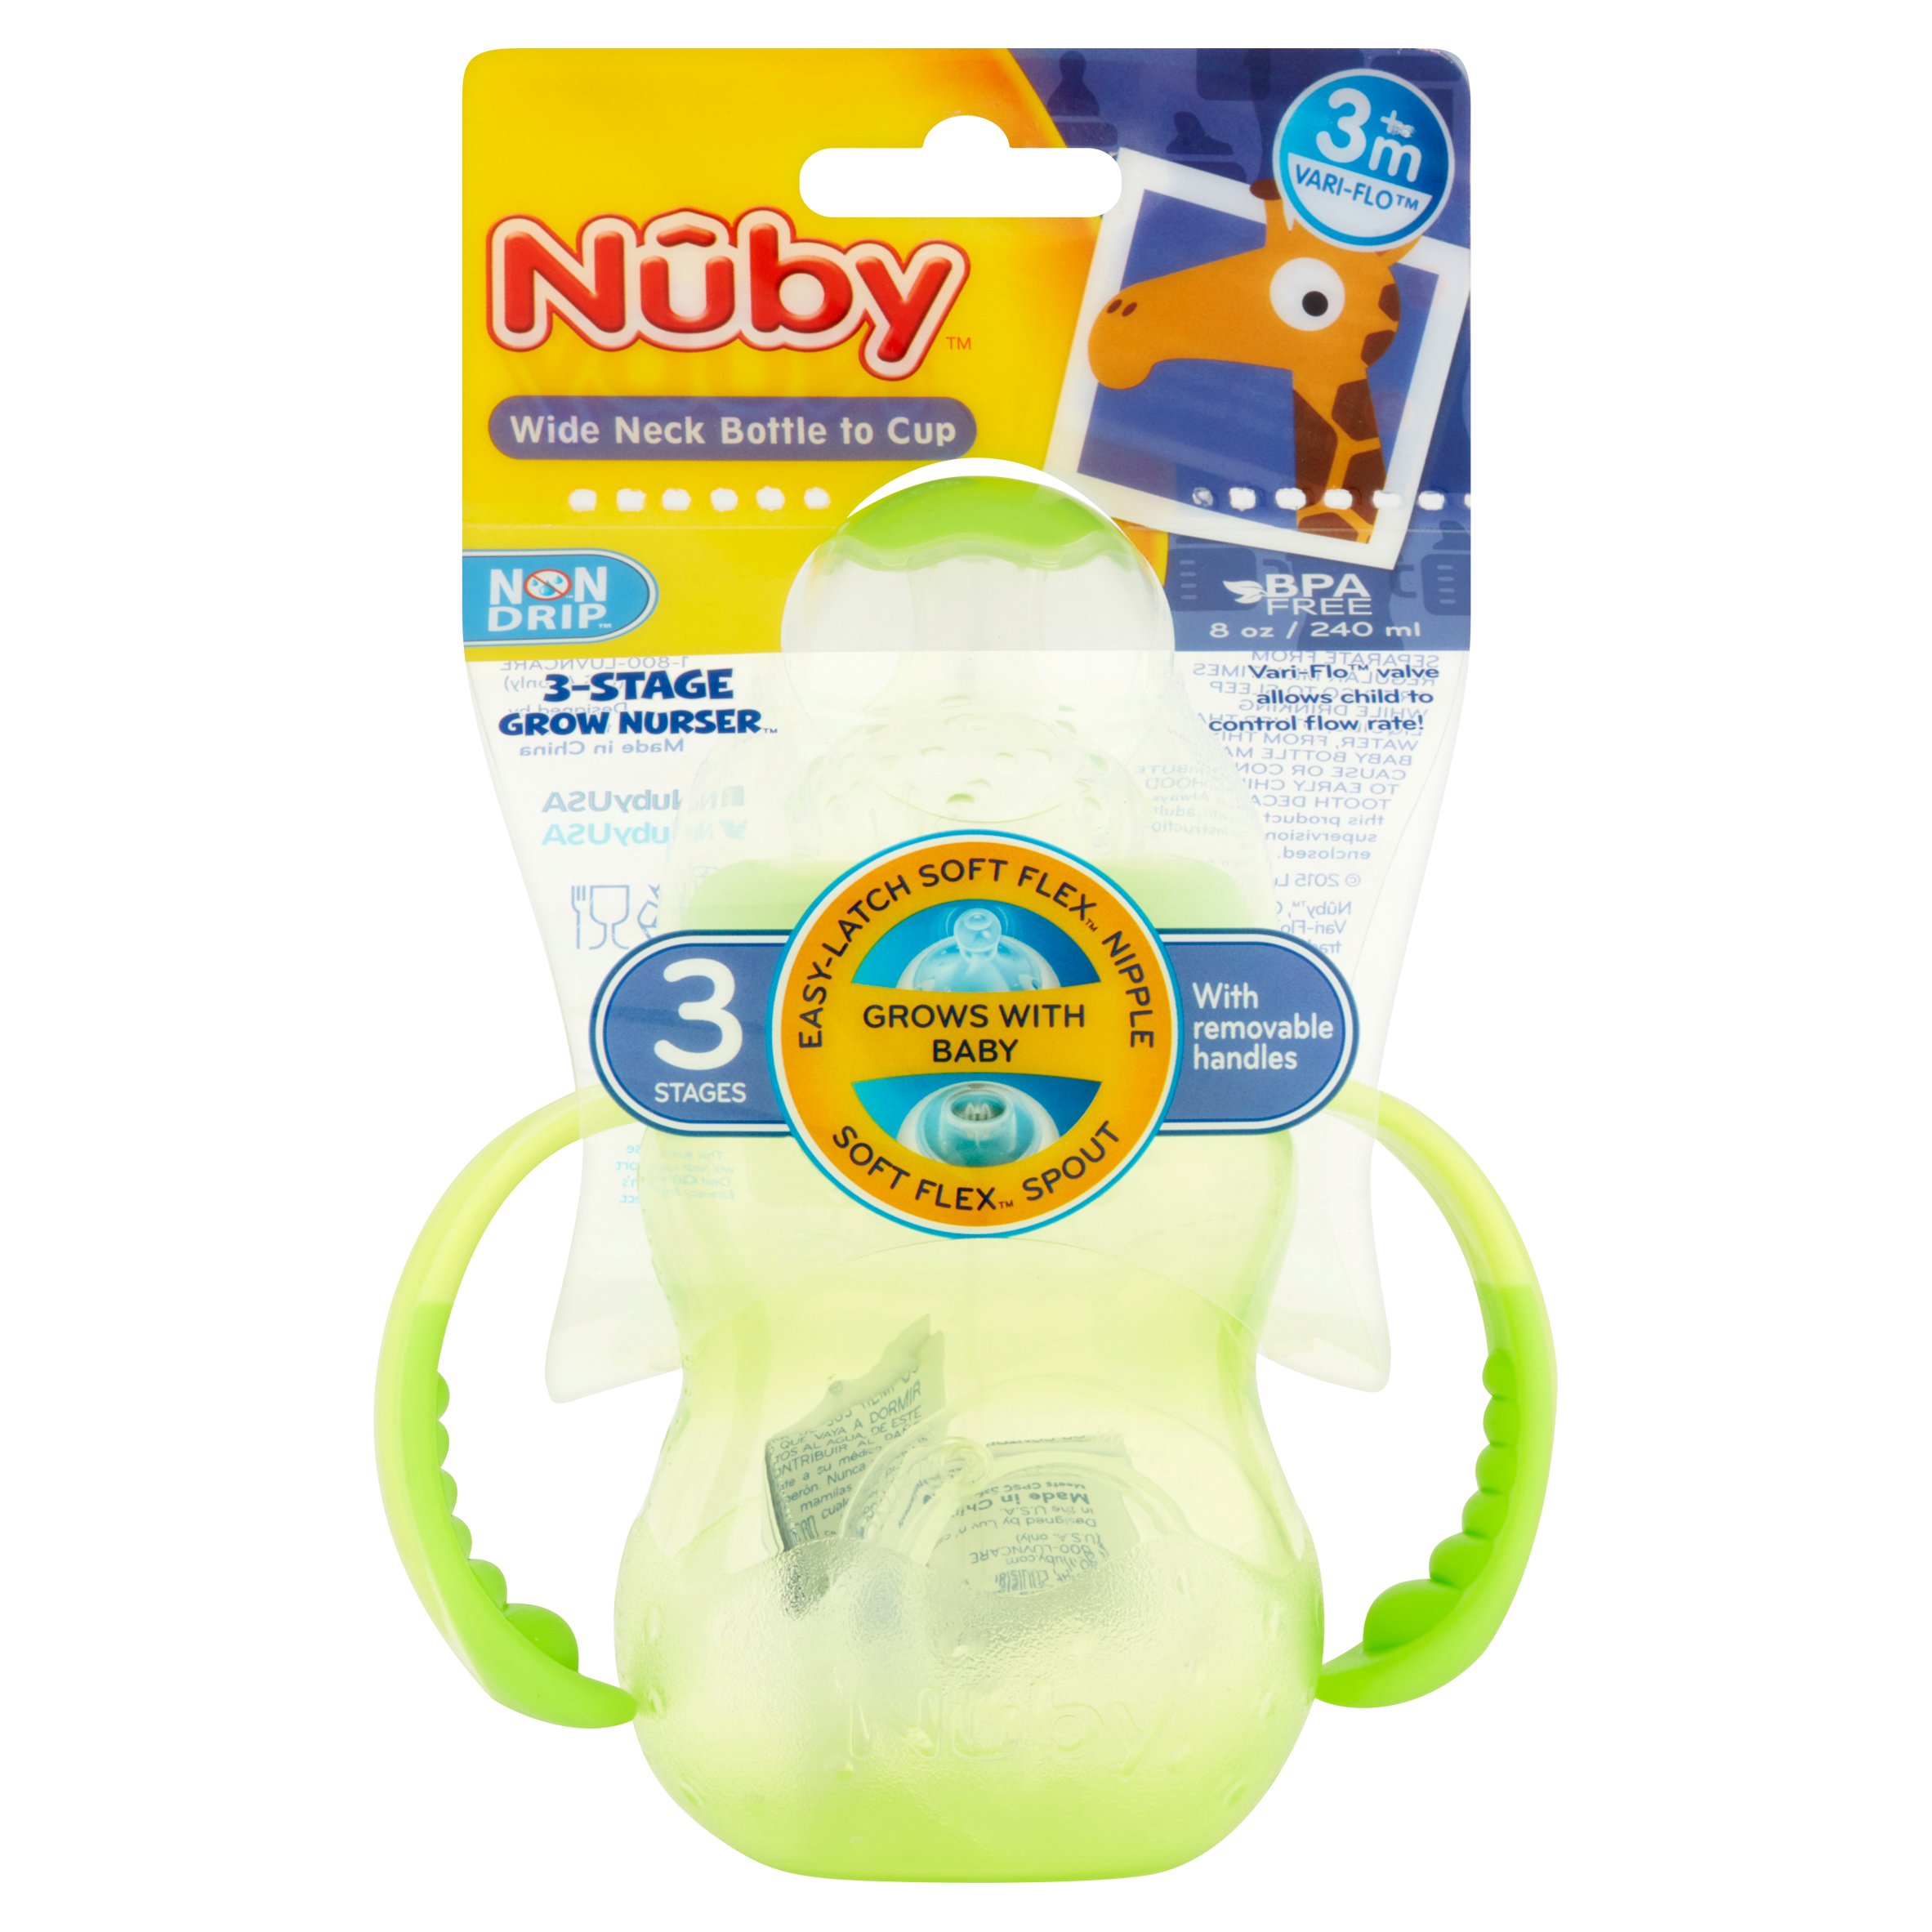 Nuby 3 Stage Baby Bottle with Handles, 3m+, Wide-Neck, 8 oz - image 3 of 3